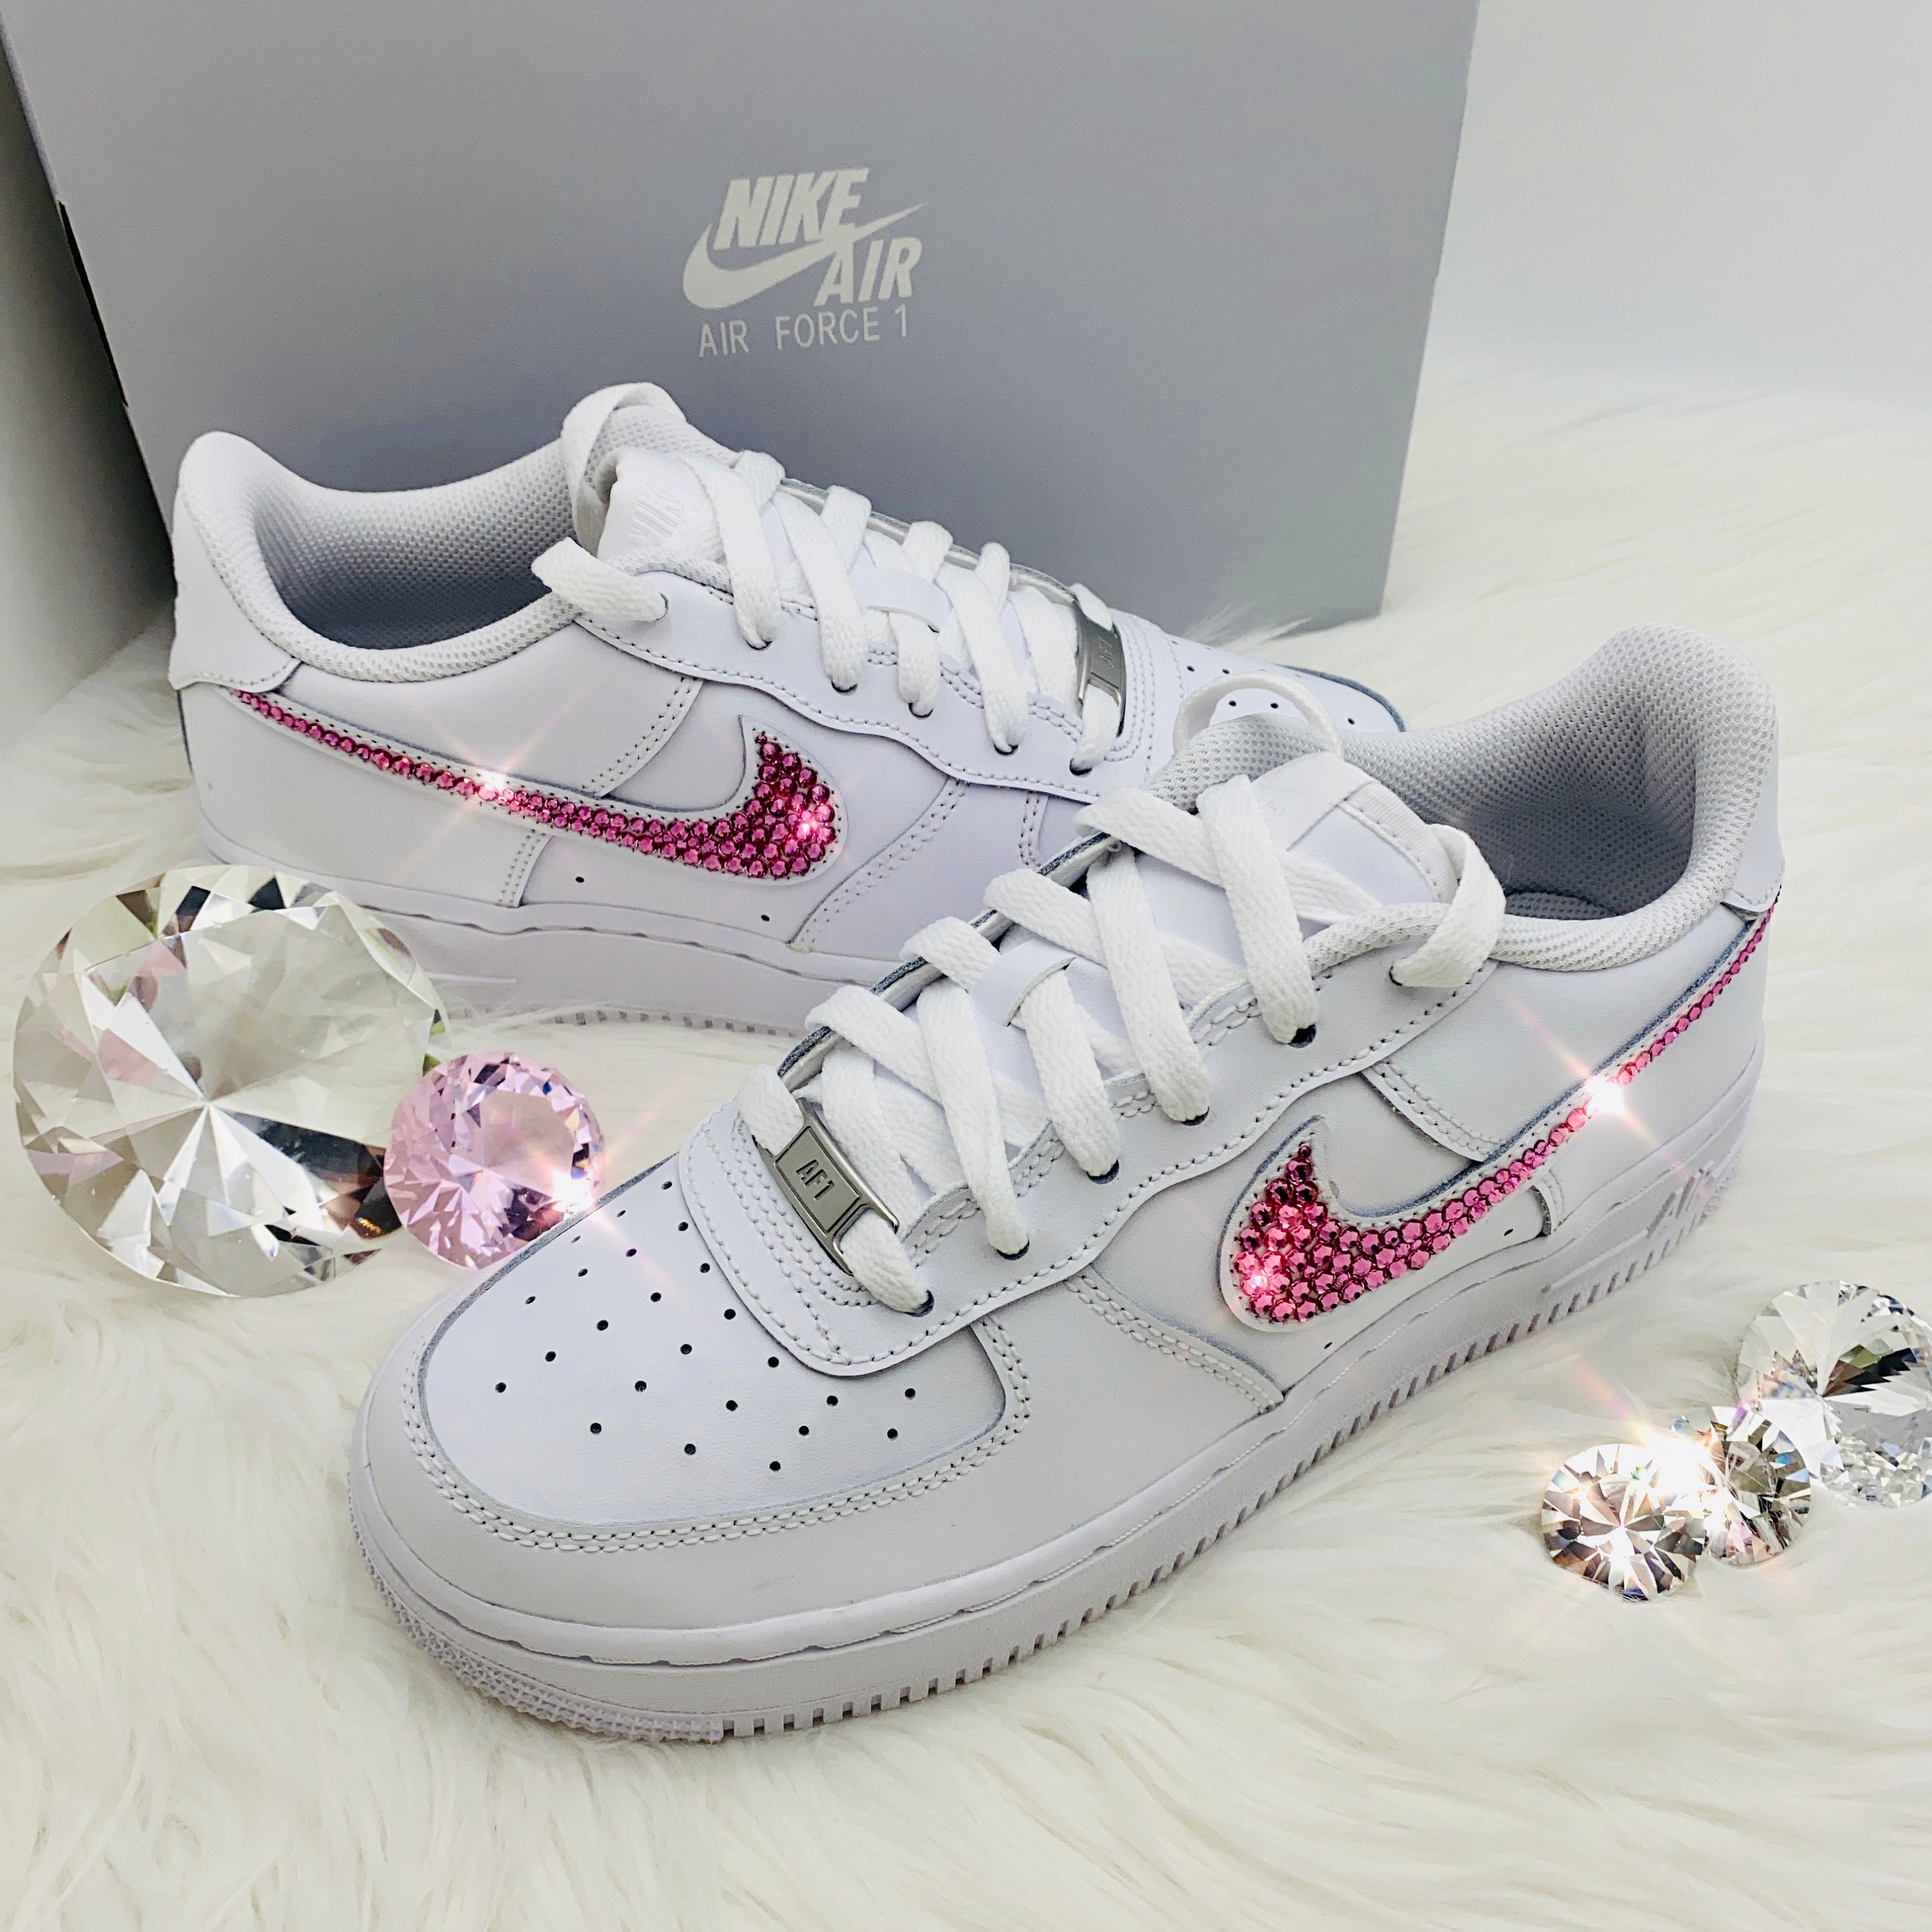 Bling Nike Air Force 1 '07 with Pink Swarovski Crystals | Etsy